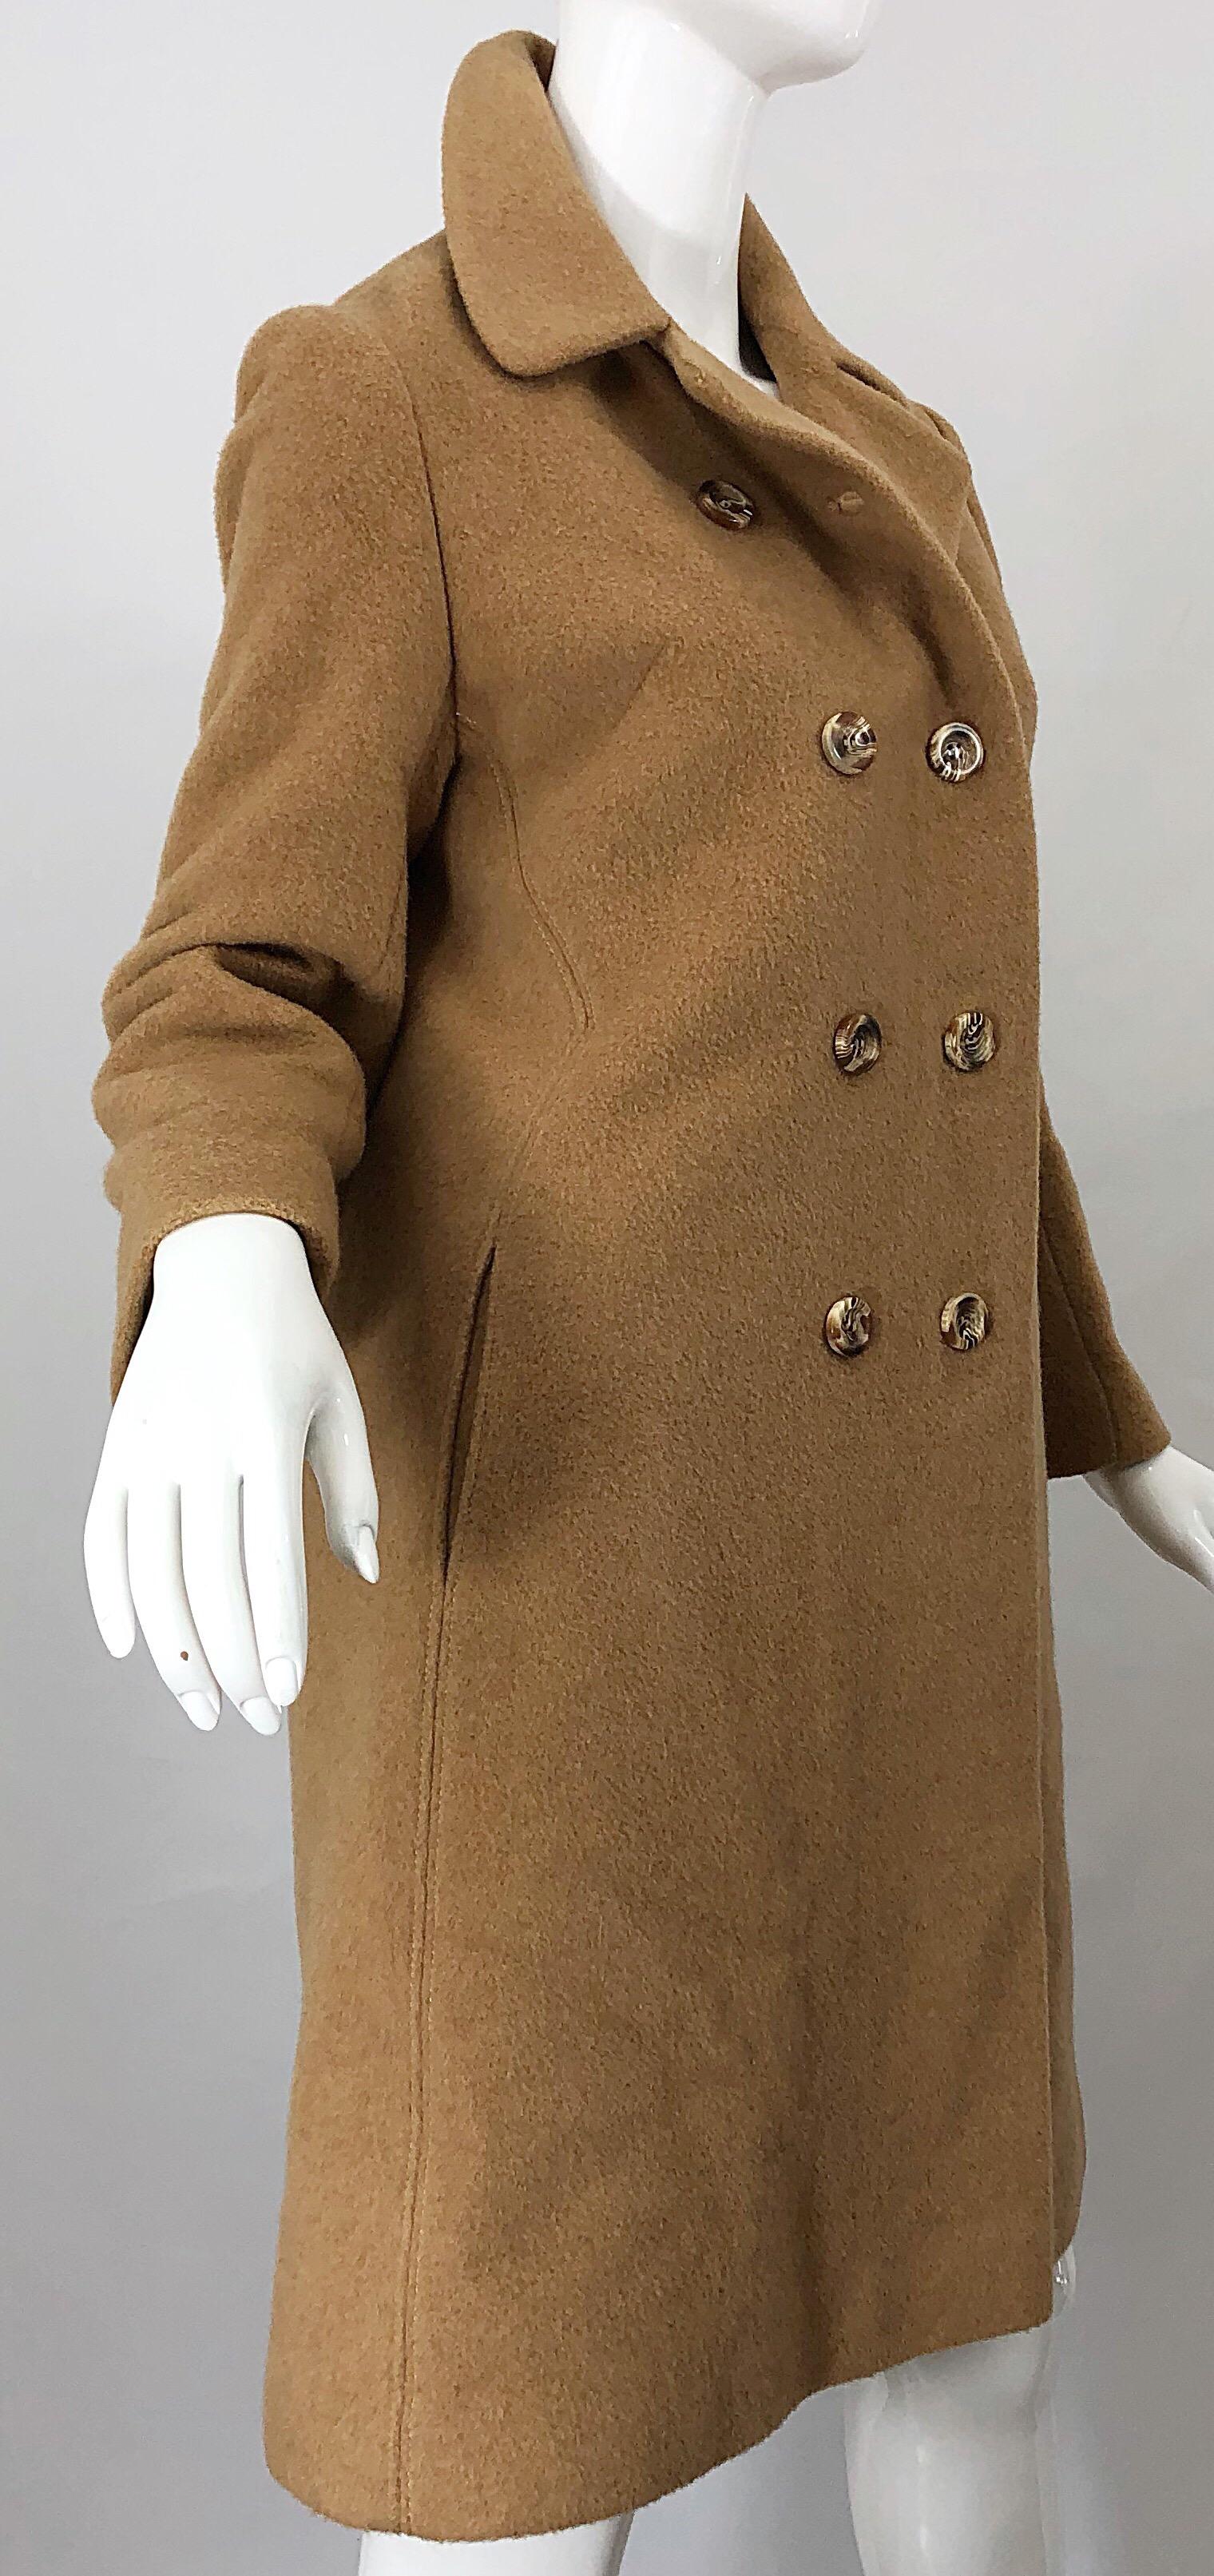 Women's Chic 1960s Camel Tan Camels Hair Wool Double Breasted Vintage Swing Jacket Coat